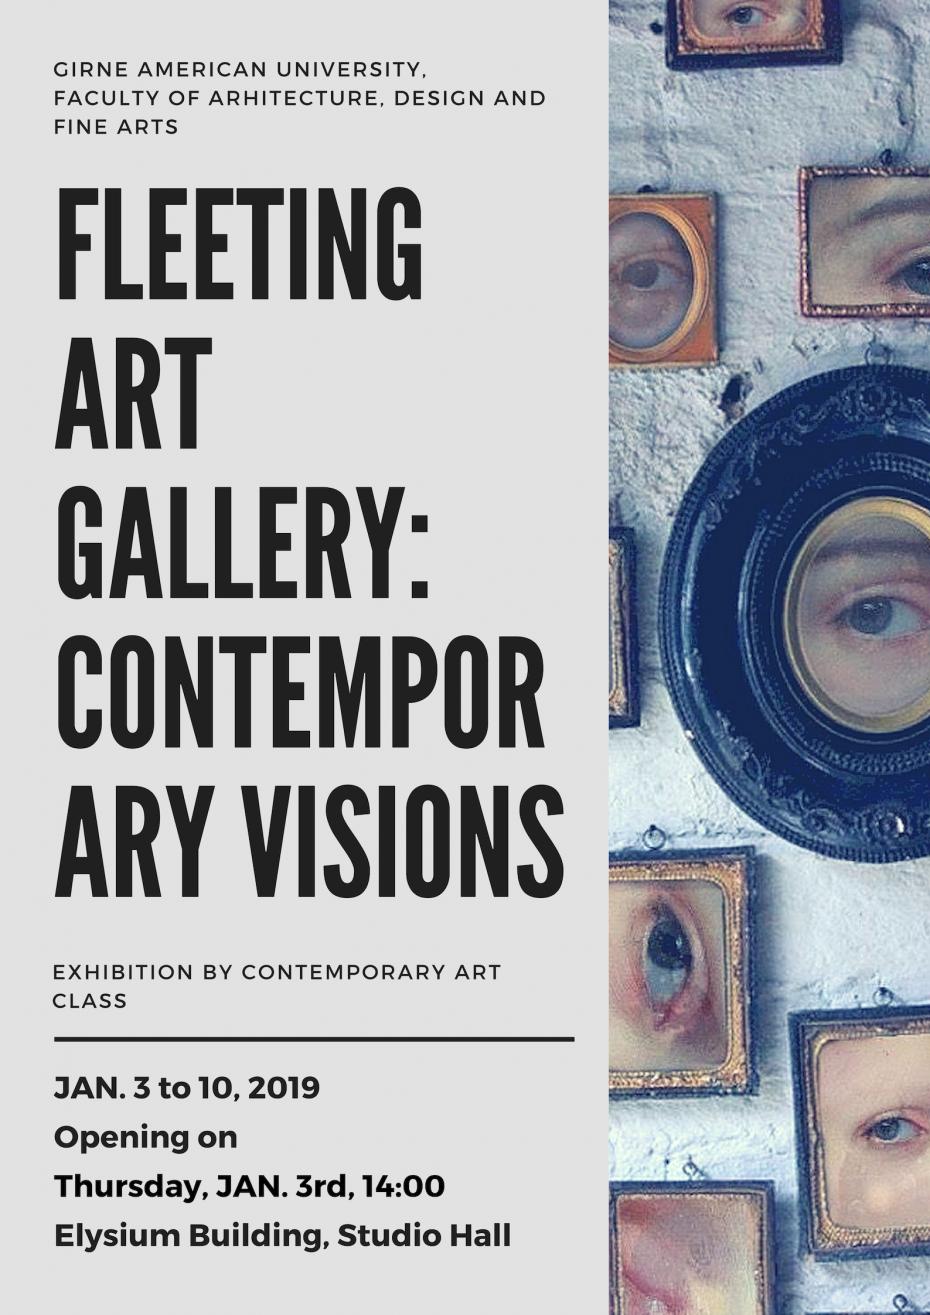 FLEETING ART GALLERY: CONTEMPORARY VISIONS